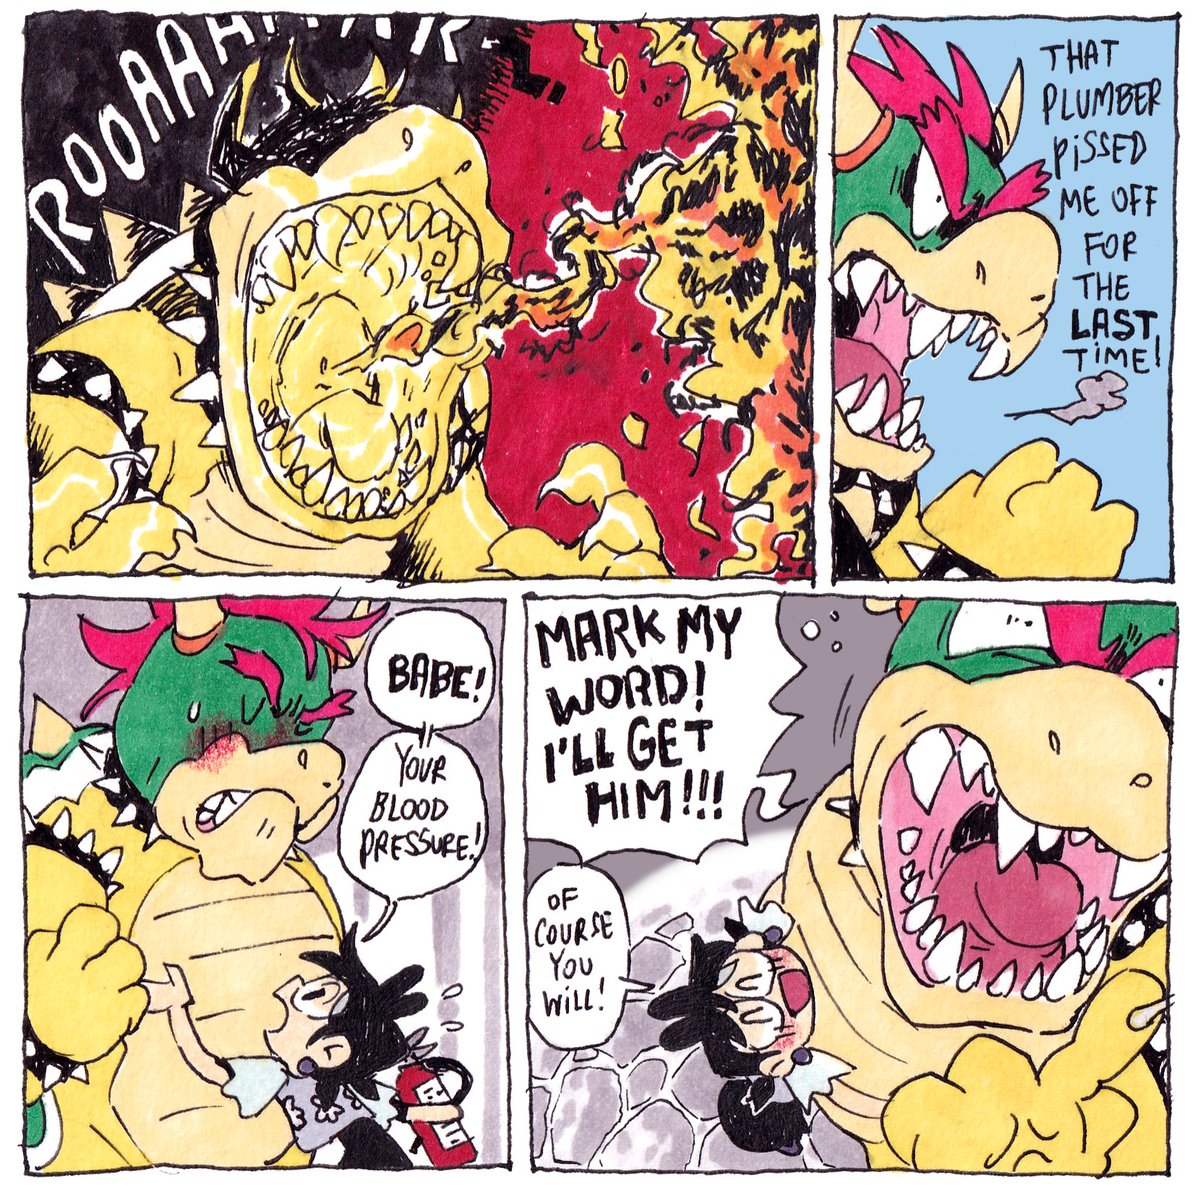 i dreamed that i was dating bowser...